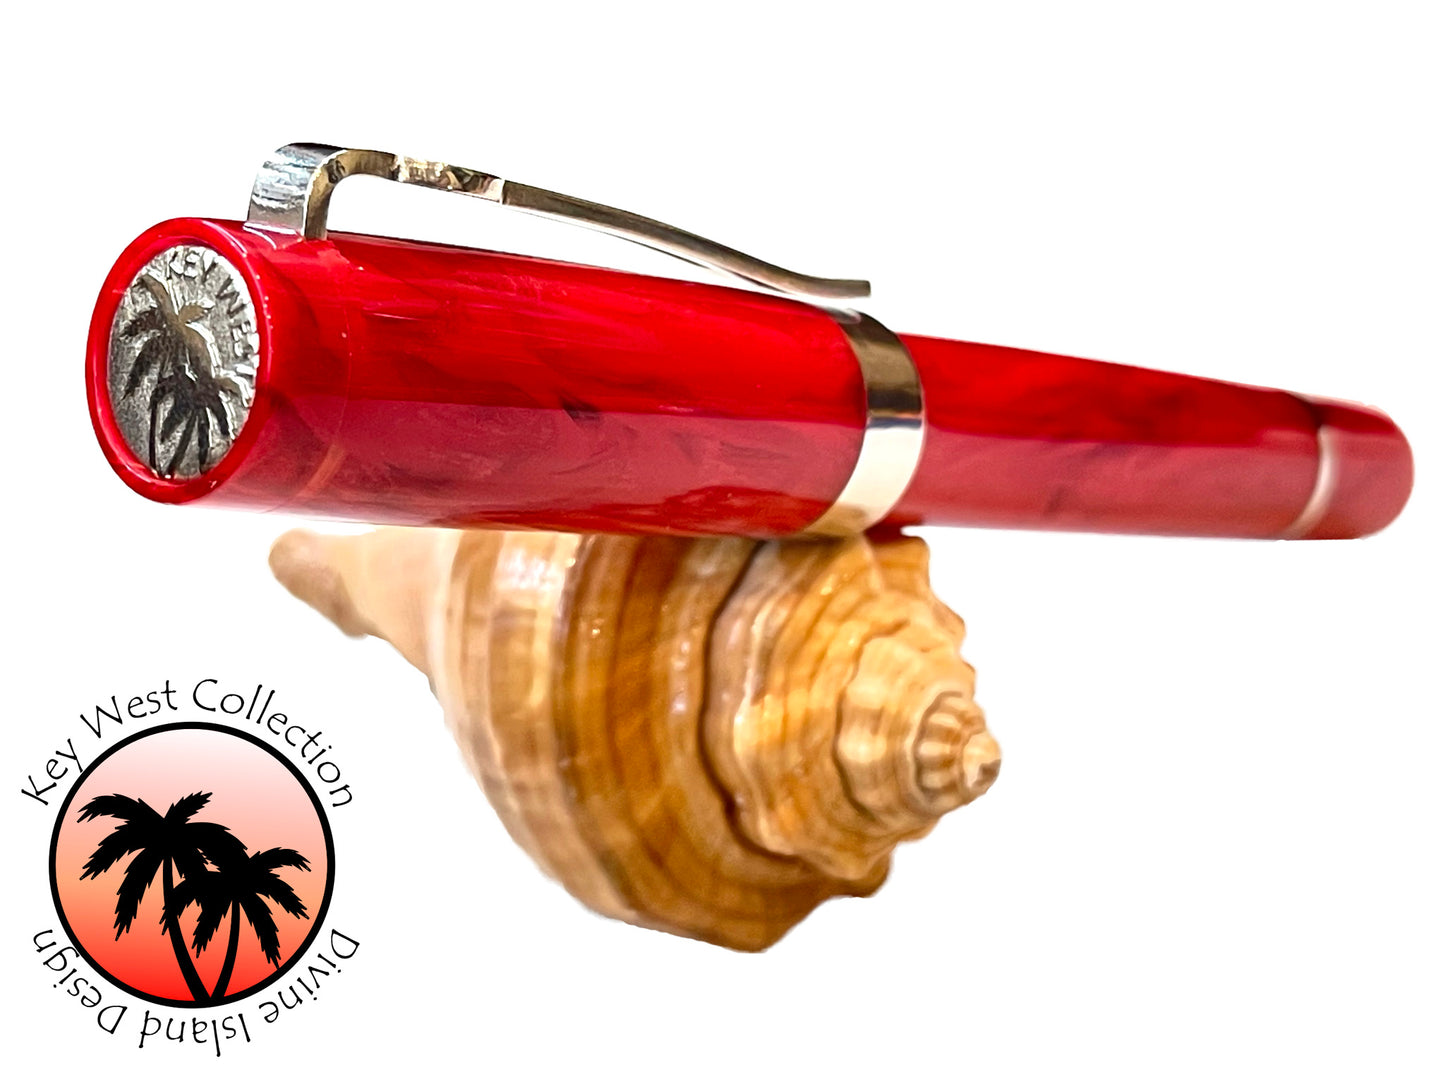 Key West Collection Fountain Pen - "Poinciana"